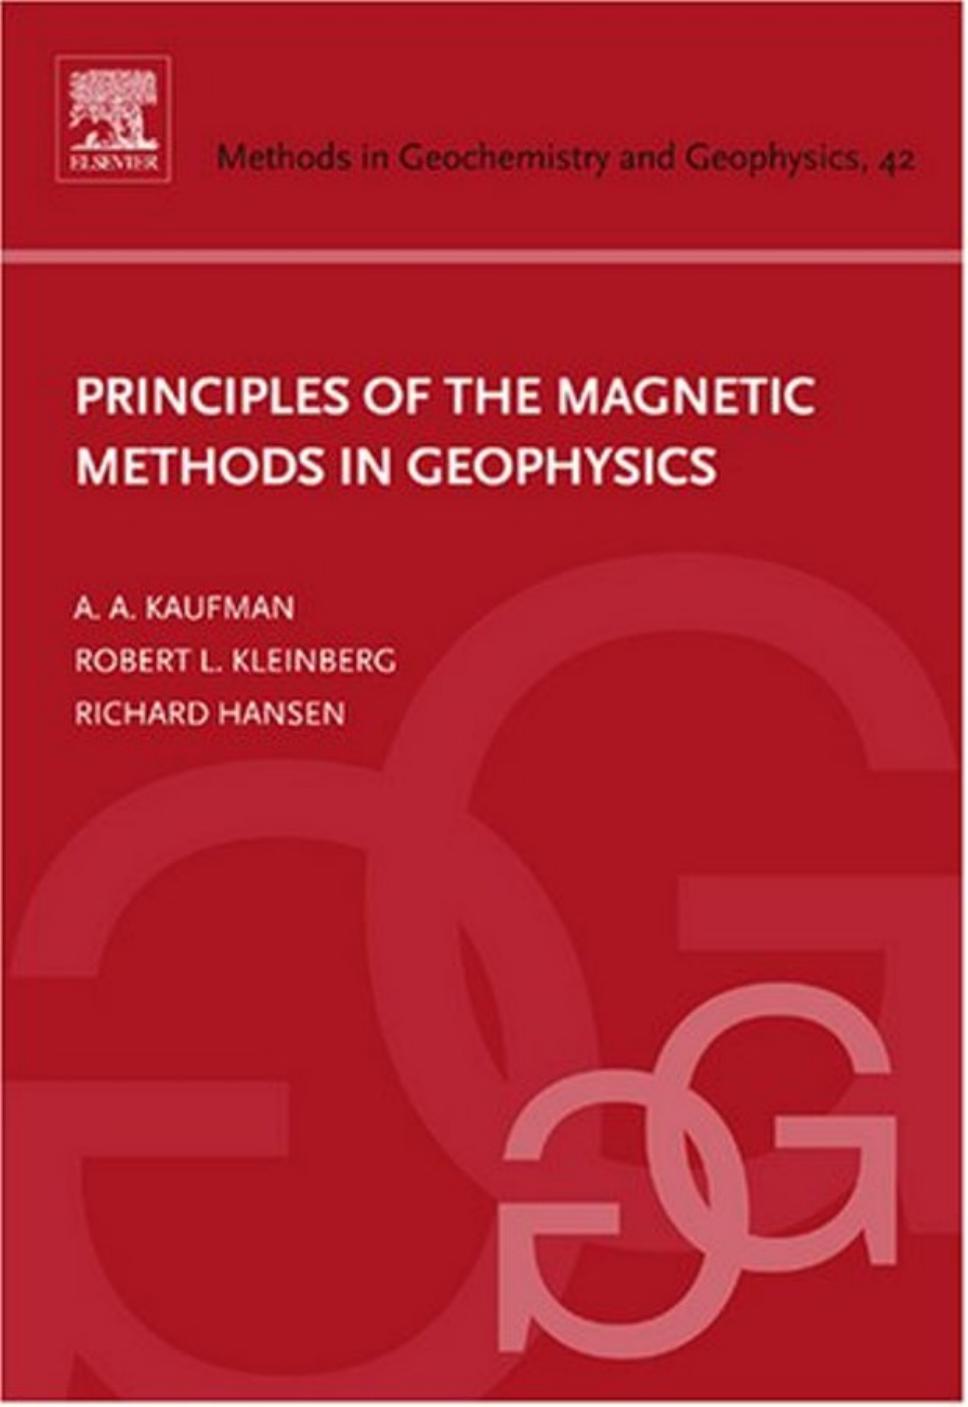 PRINCIPLES OF THE MAGNETIC METHODS IN GEOPHYSICS